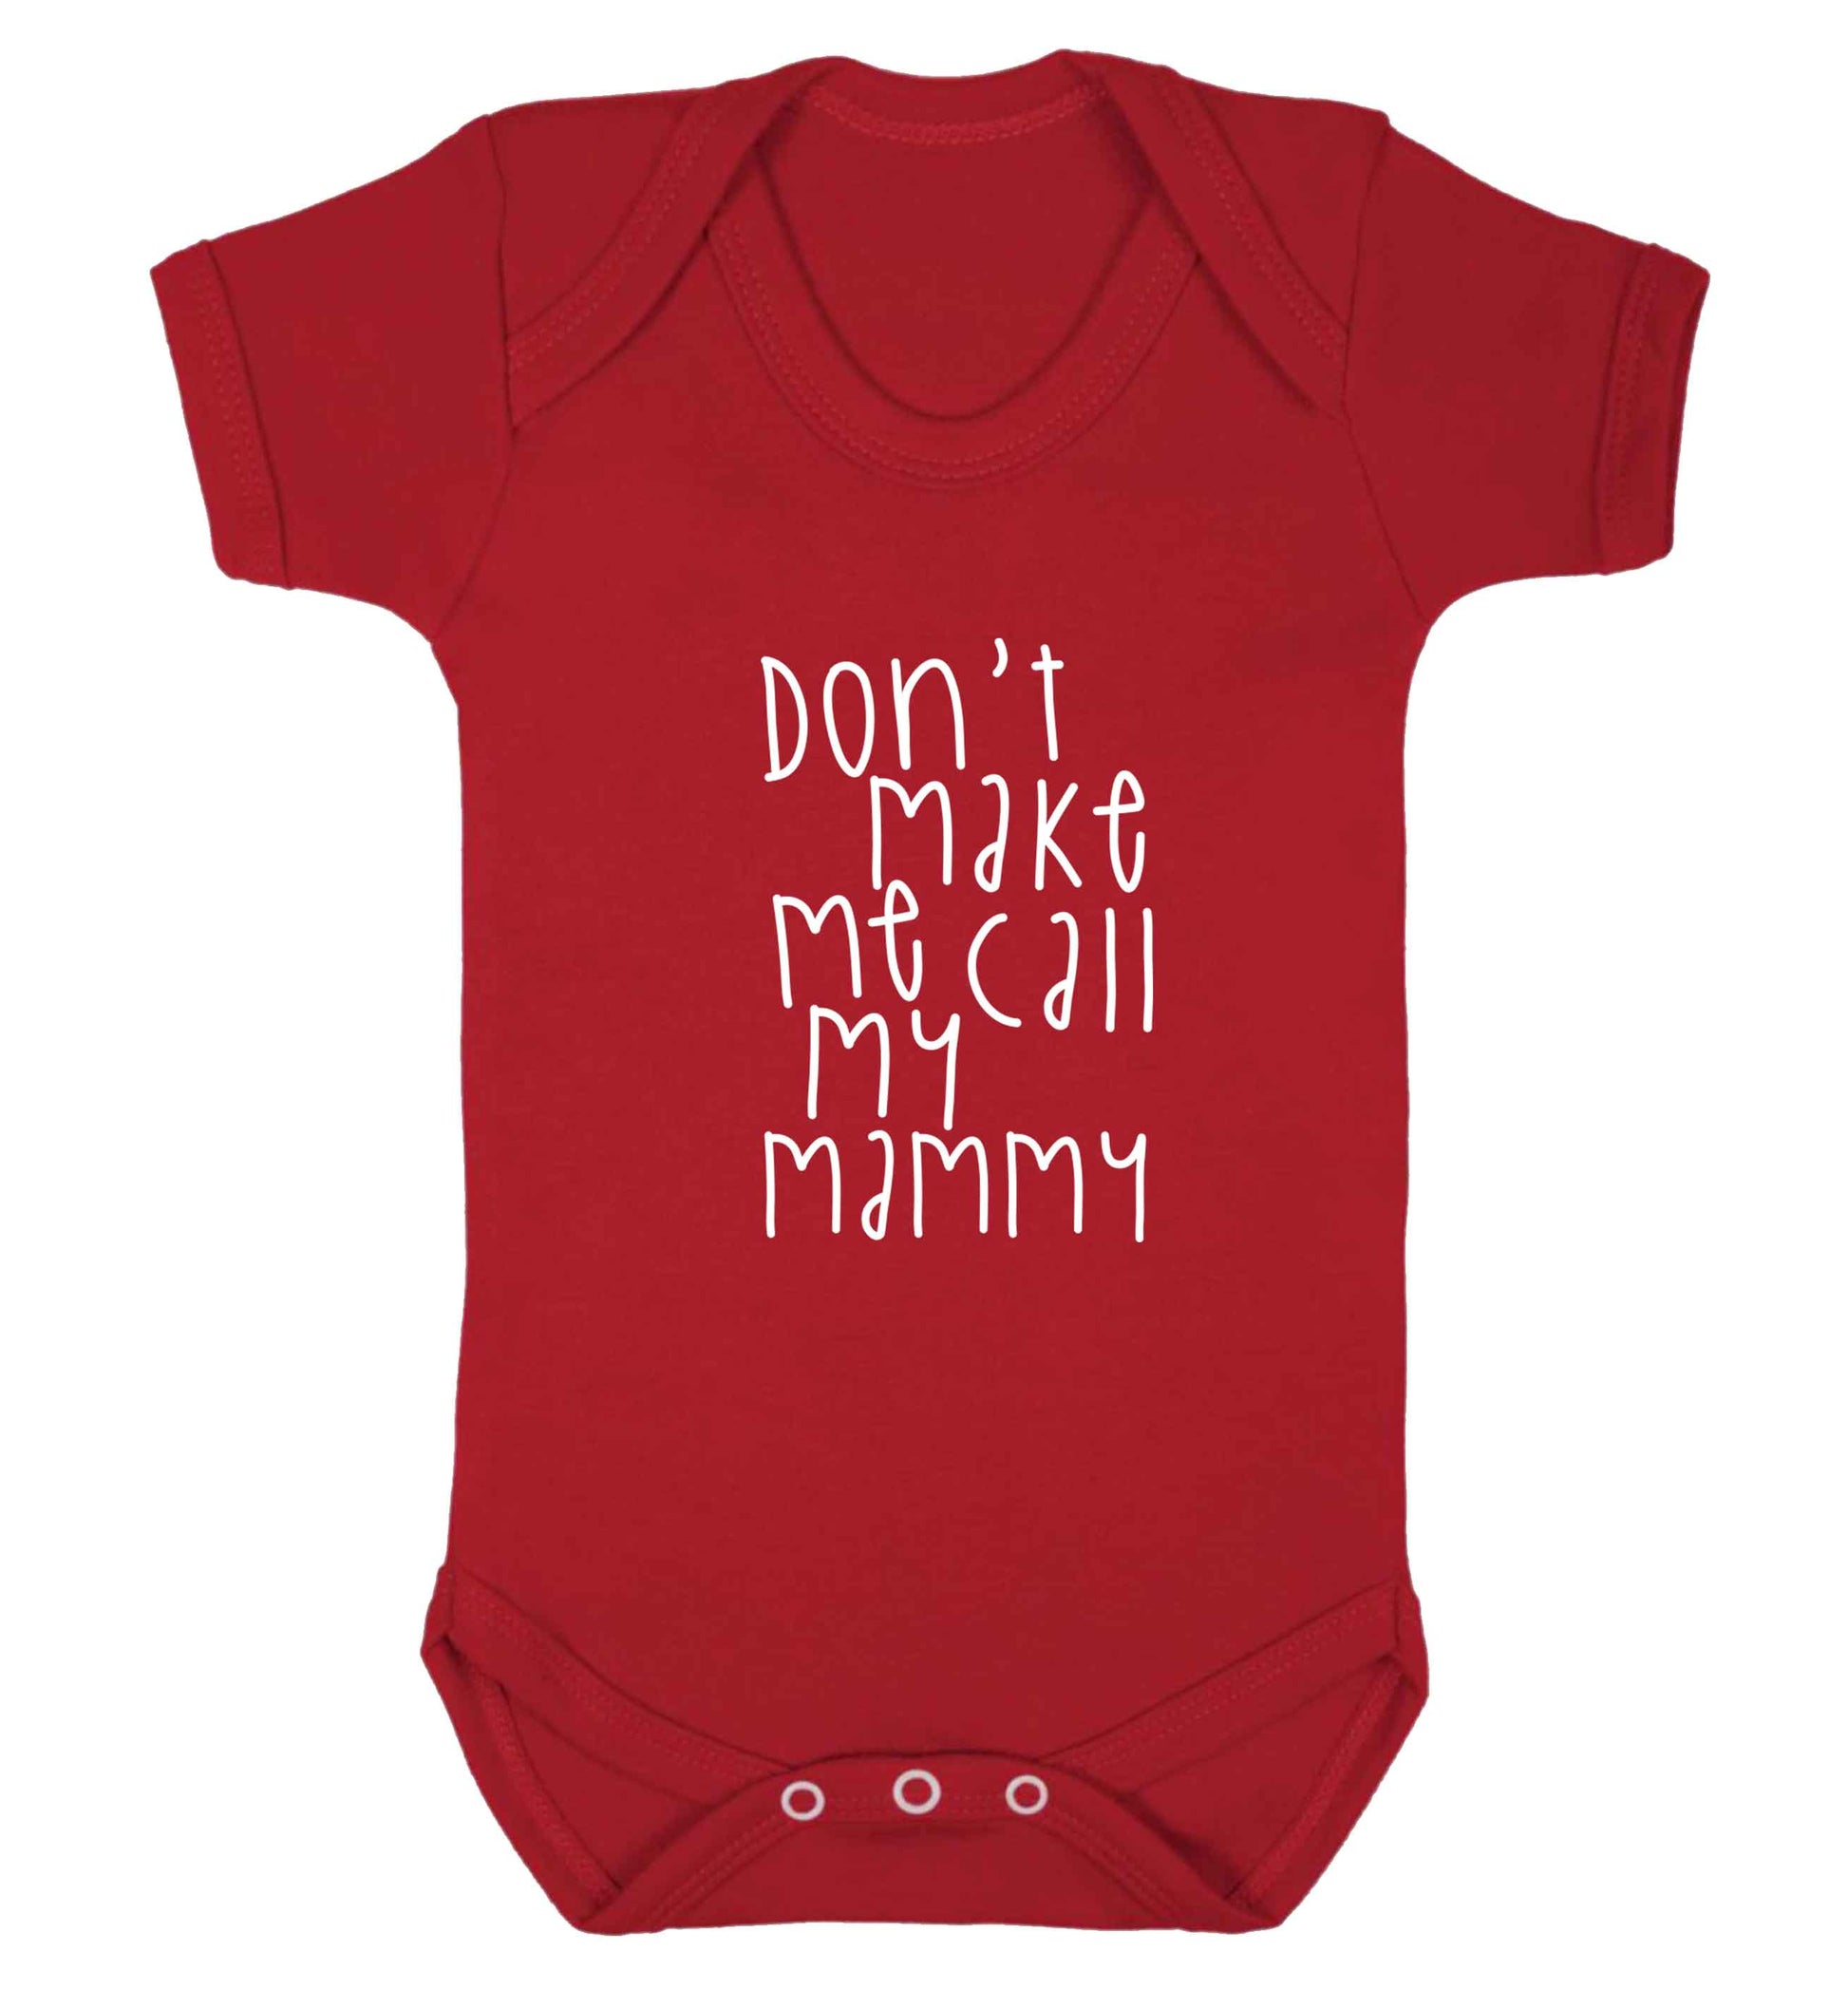 Don't make me call my mammy baby vest red 18-24 months